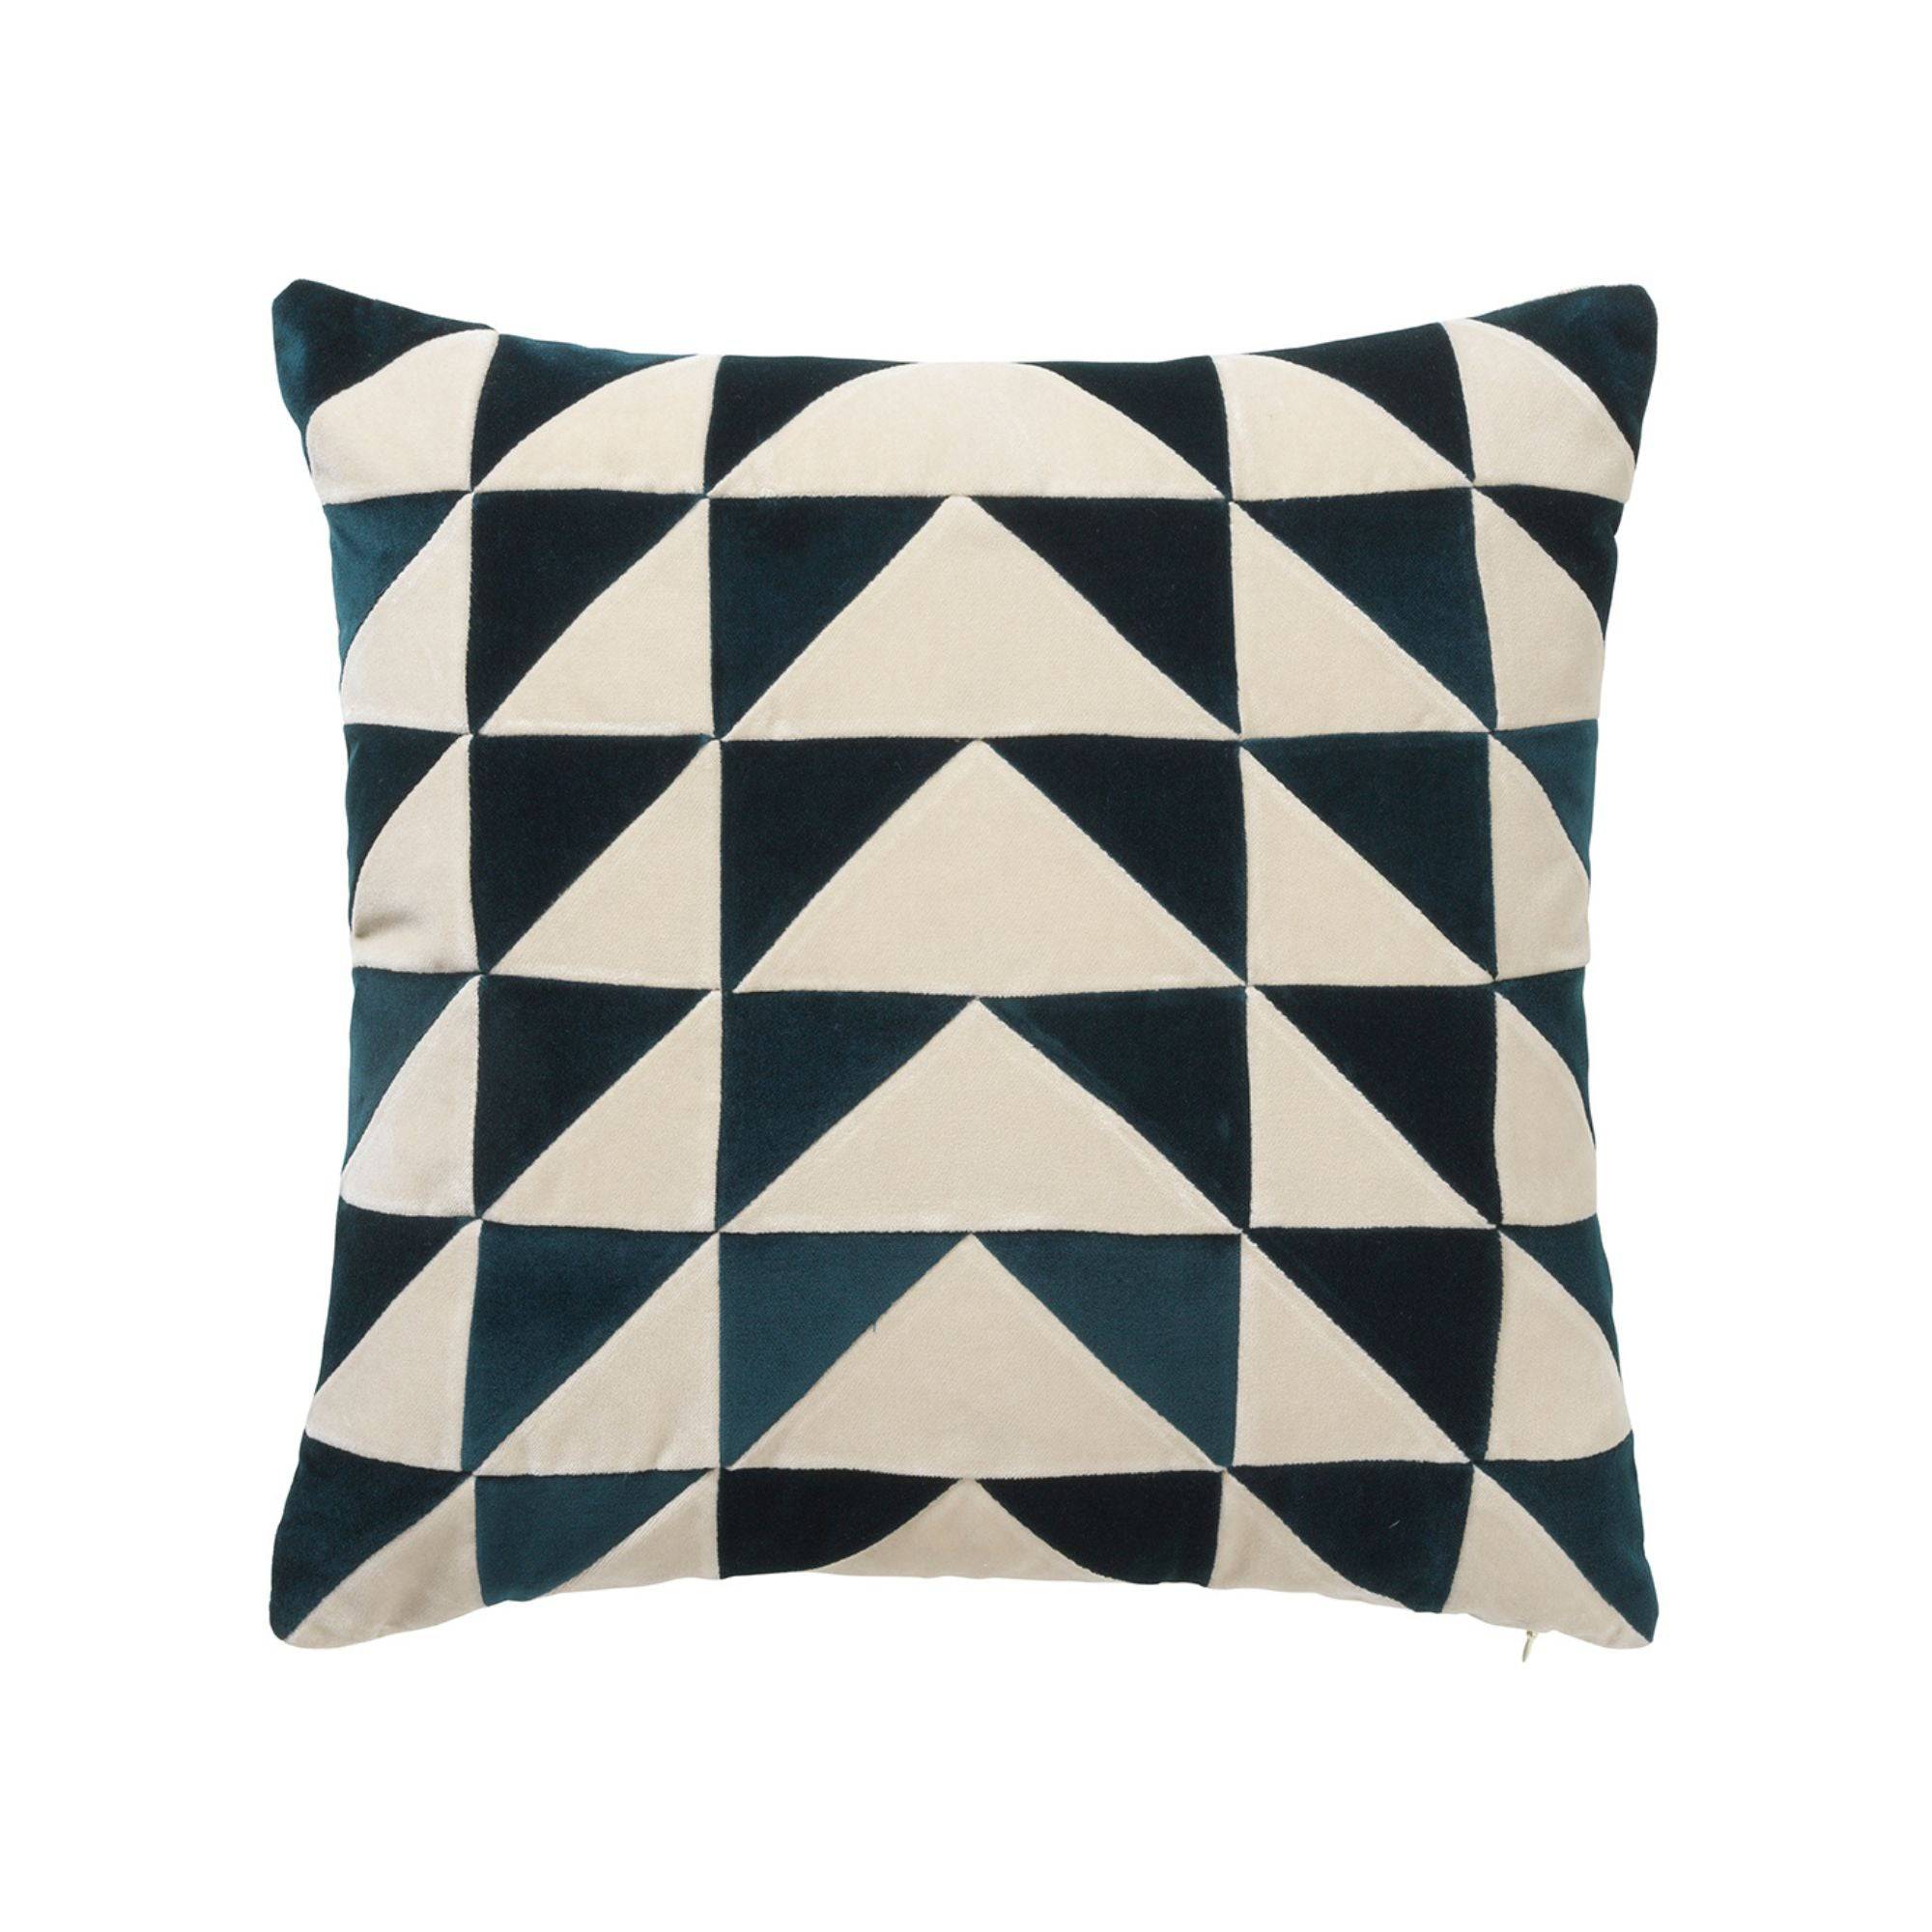 Elly Cushion - New Petrol & Dusty White - THAT COOL LIVING